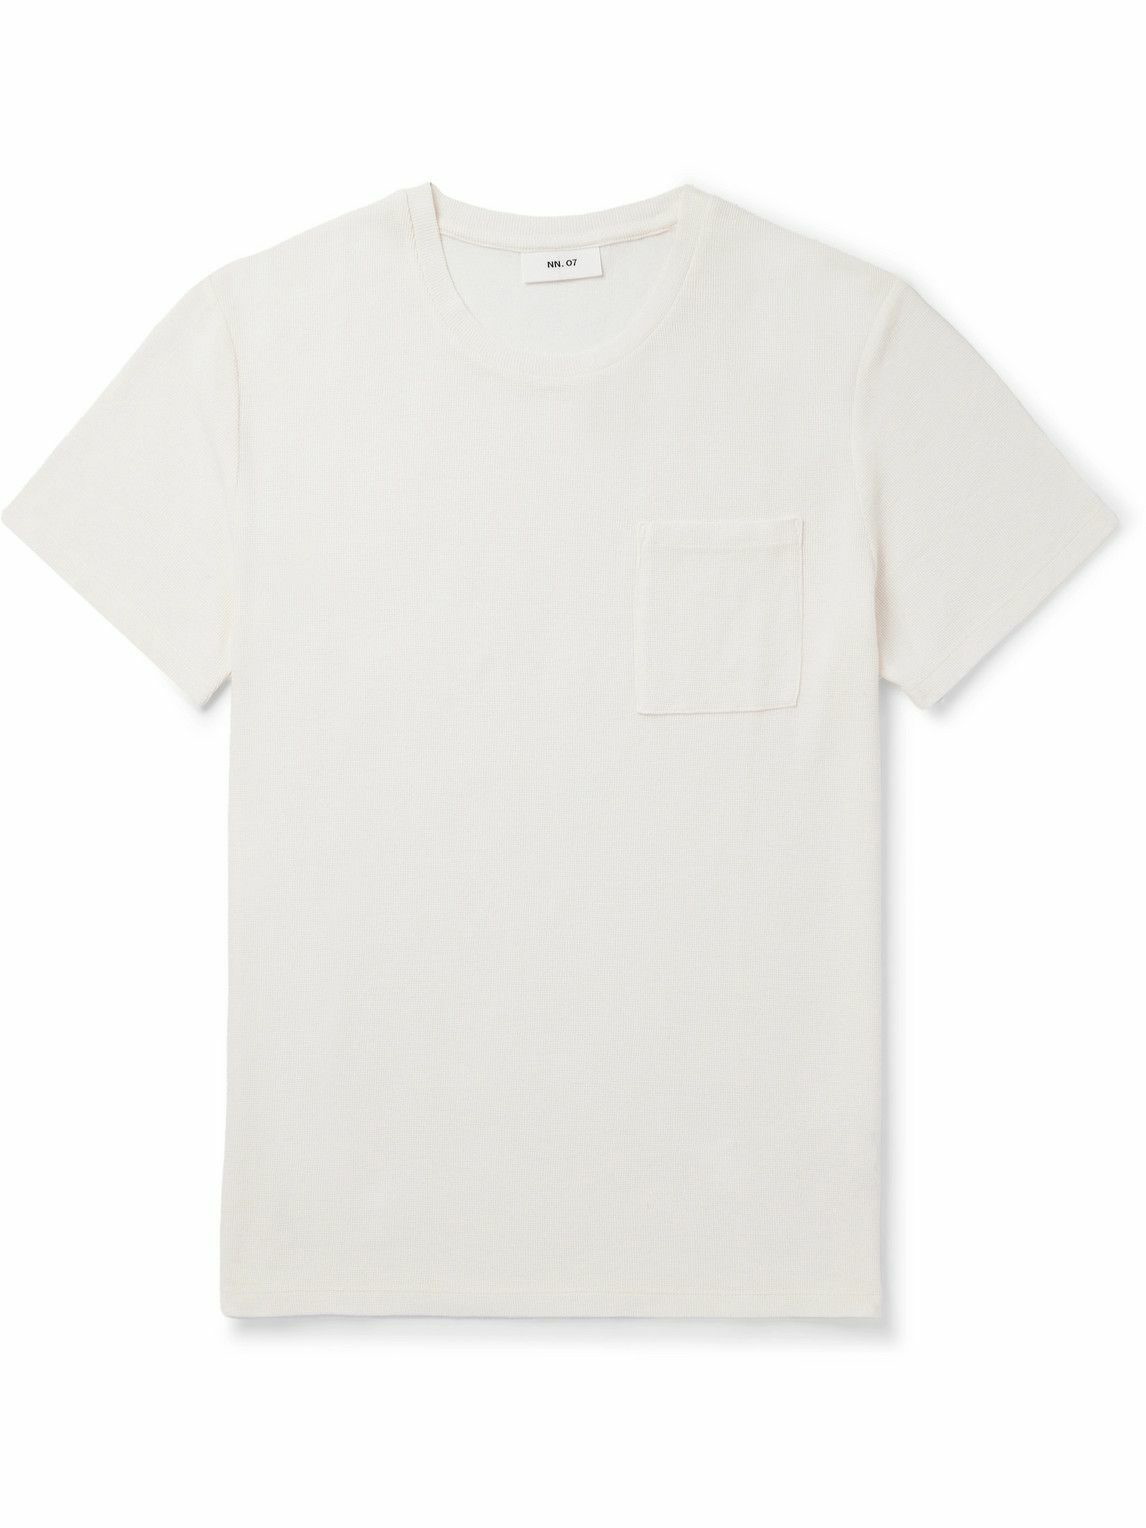 NN07 - Clive 3323 Waffle-Knit Cotton and TENCEL™ Modal-Blend T-Shirt ...